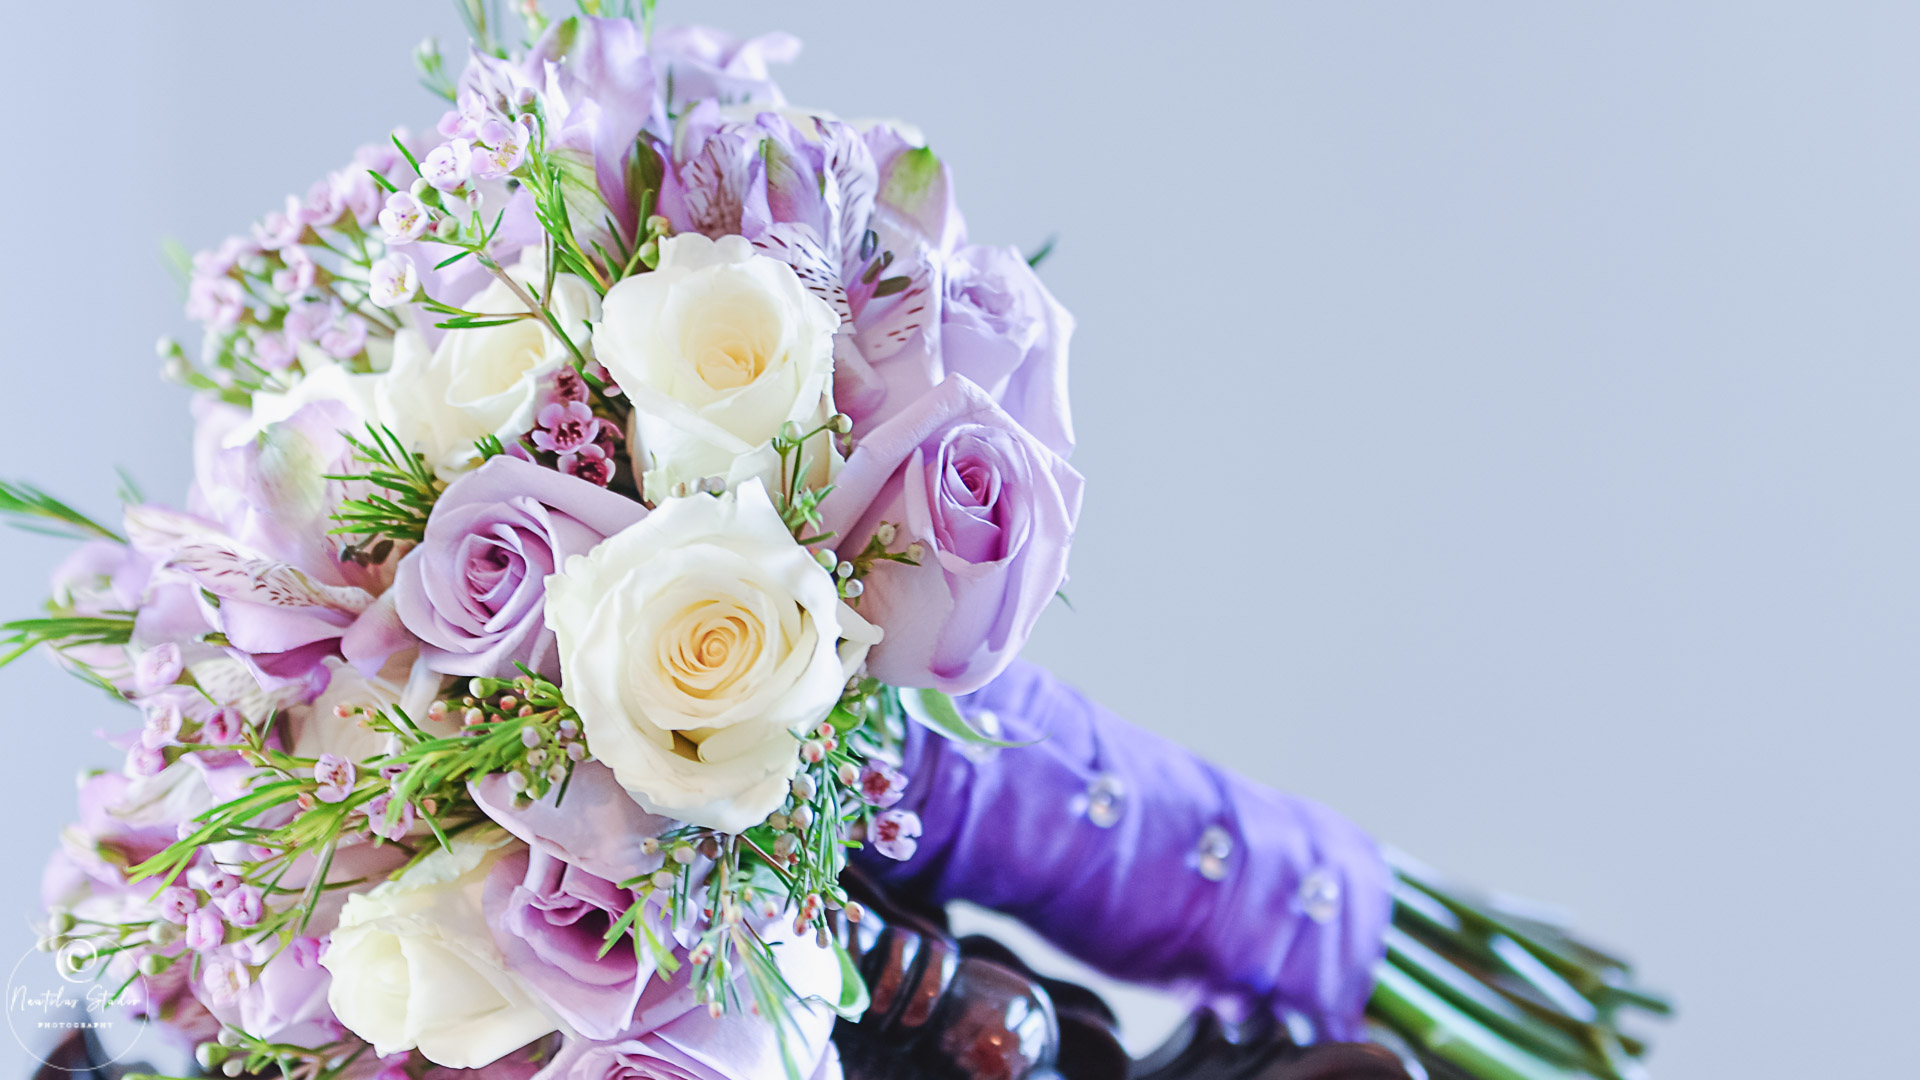 Photo showing bridal bouquet in light lavender and creme roses